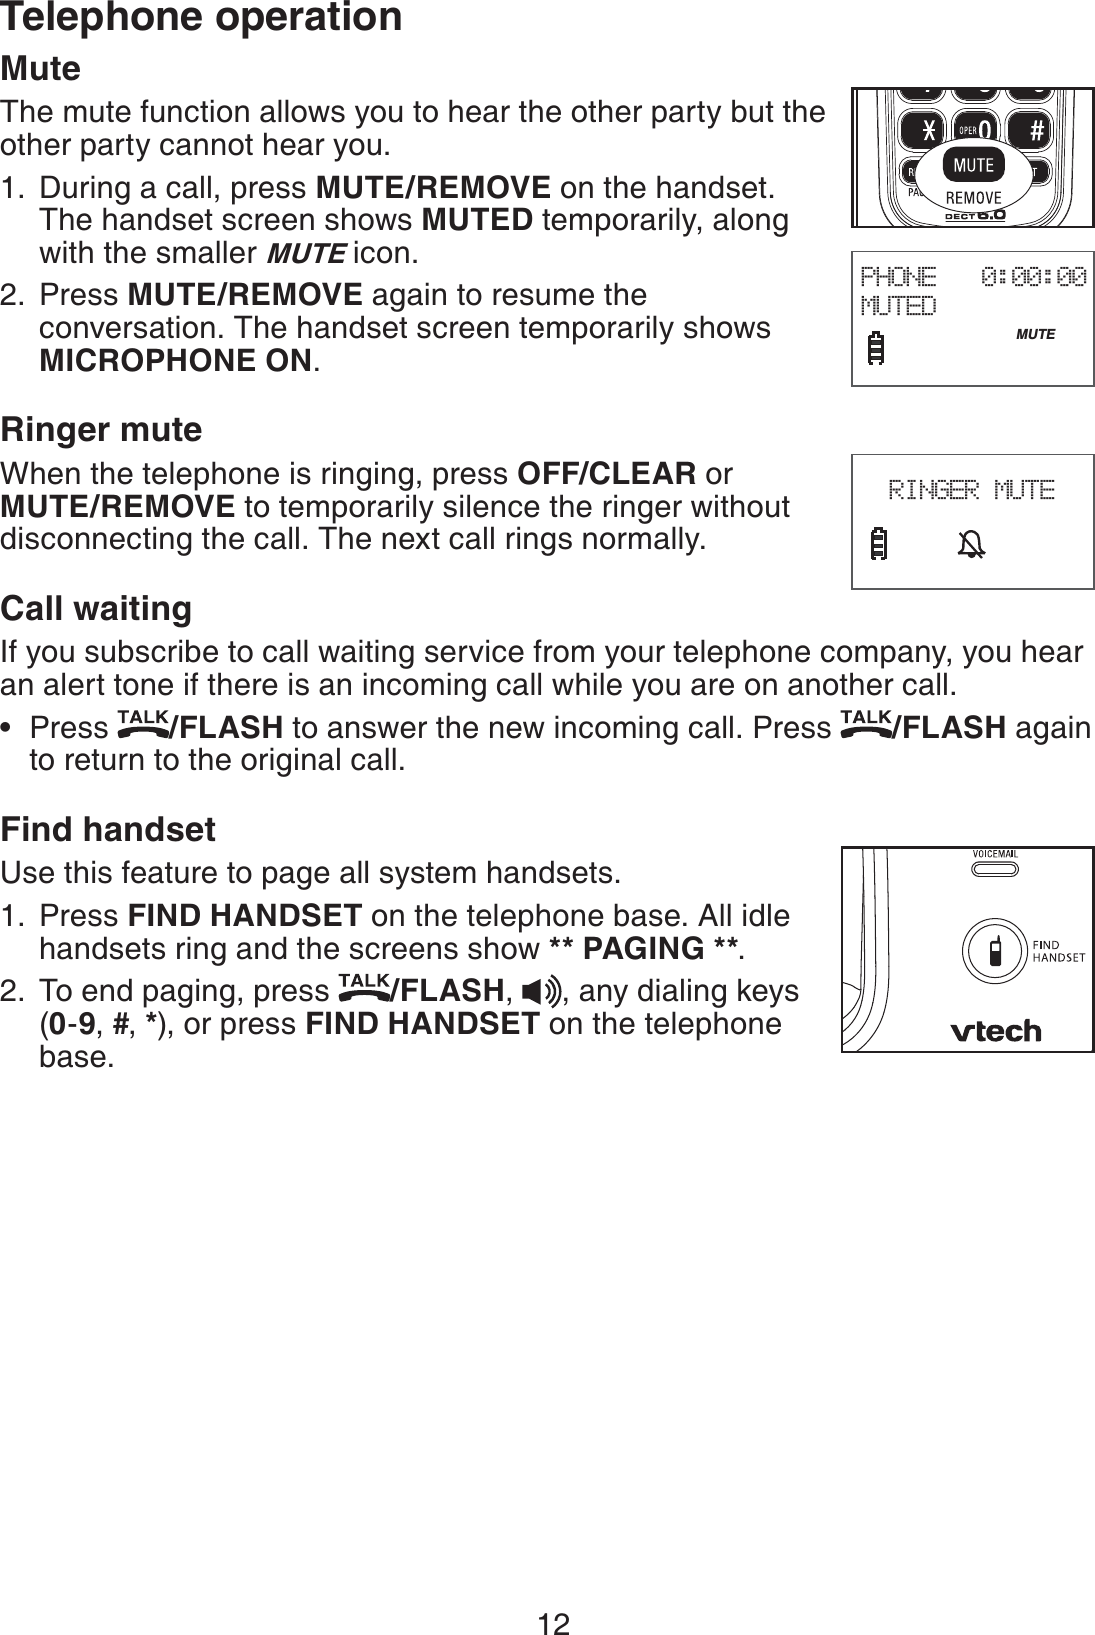 12Telephone operationMuteThe mute function allows you to hear the other party but the other party cannot hear you.During a call, press MUTE/REMOVE on the handset. The handset screen shows MUTED temporarily, along with the smaller MUTE icon.Press MUTE/REMOVE again to resume the conversation. The handset screen temporarily shows MICROPHONE ON.Ringer muteWhen the telephone is ringing, press OFF/CLEAR or MUTE/REMOVE to temporarily silence the ringer without disconnecting the call. The next call rings normally.Call waitingIf you subscribe to call waiting service from your telephone company, you hear an alert tone if there is an incoming call while you are on another call.Press  /FLASH to answer the new incoming call. Press  /FLASH again to return to the original call.Find handsetUse this feature to page all system handsets.Press FIND HANDSET on the telephone base. All idle handsets ring and the screens show ** PAGING **.To end paging, press  /FLASH,  , any dialing keys (0-9, #, *), or press FIND HANDSET on the telephone base.1.2.•1.2.PHONE   0:00:00MUTED                              MUTE       RINGER MUTE